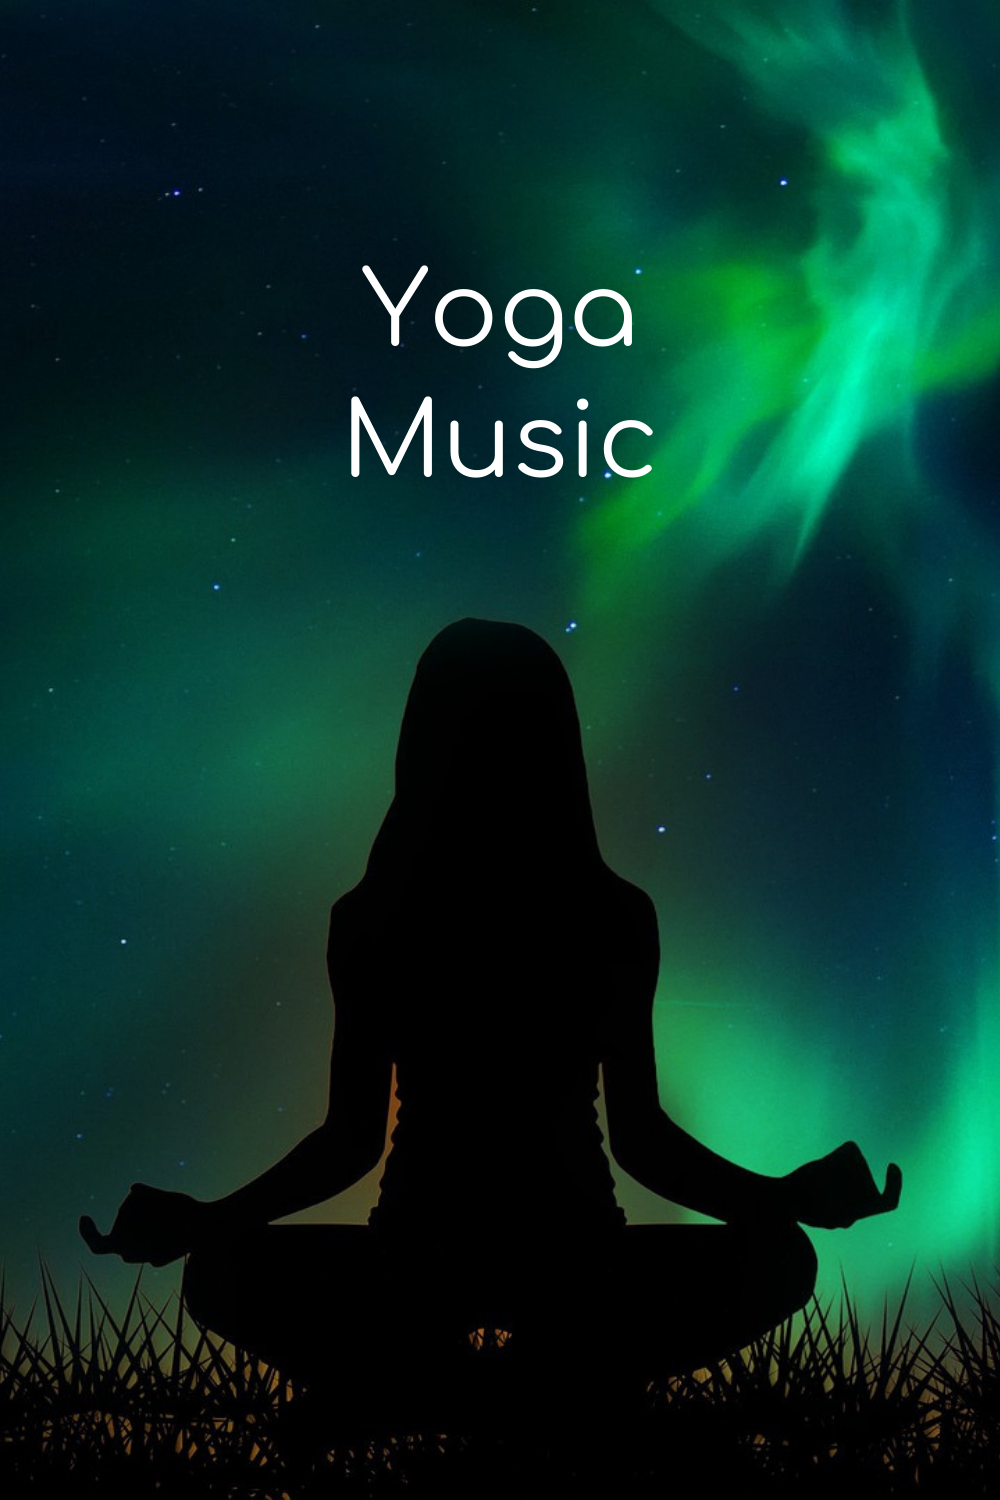 Use this music for your yoga workouts or as a stress relief.